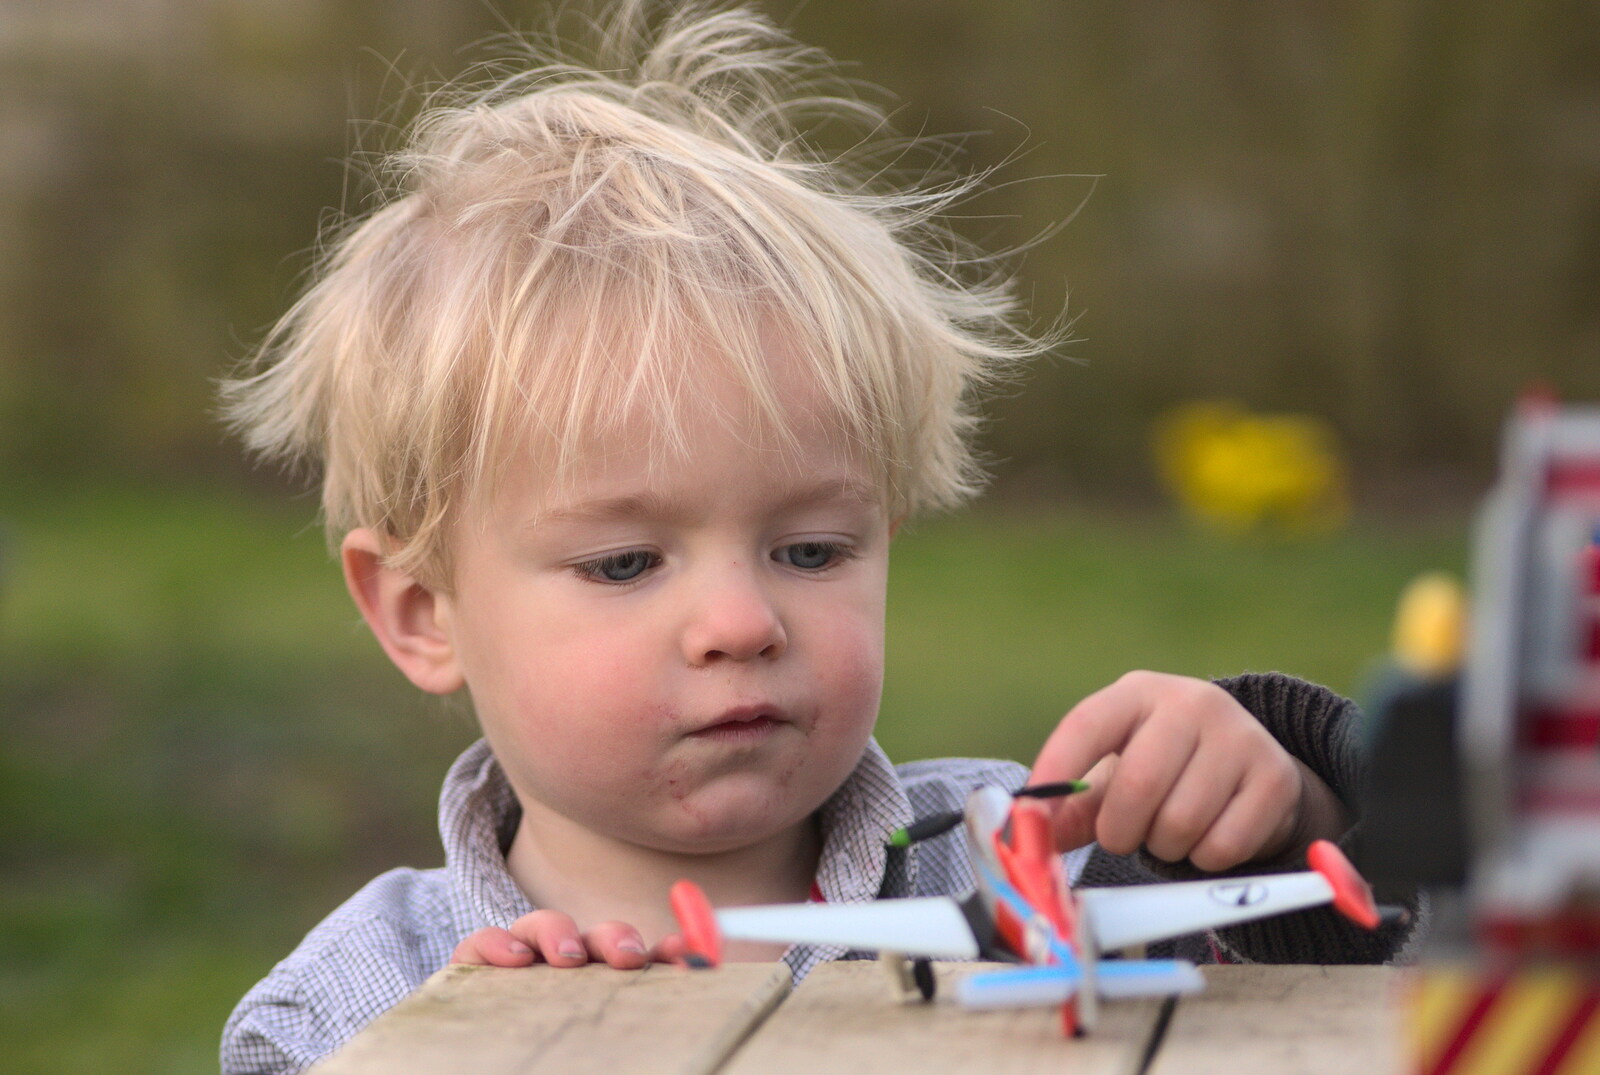 Harry plays with a toy plane from Emily Comes to Visit, Brome, Suffolk - 15th March 2014